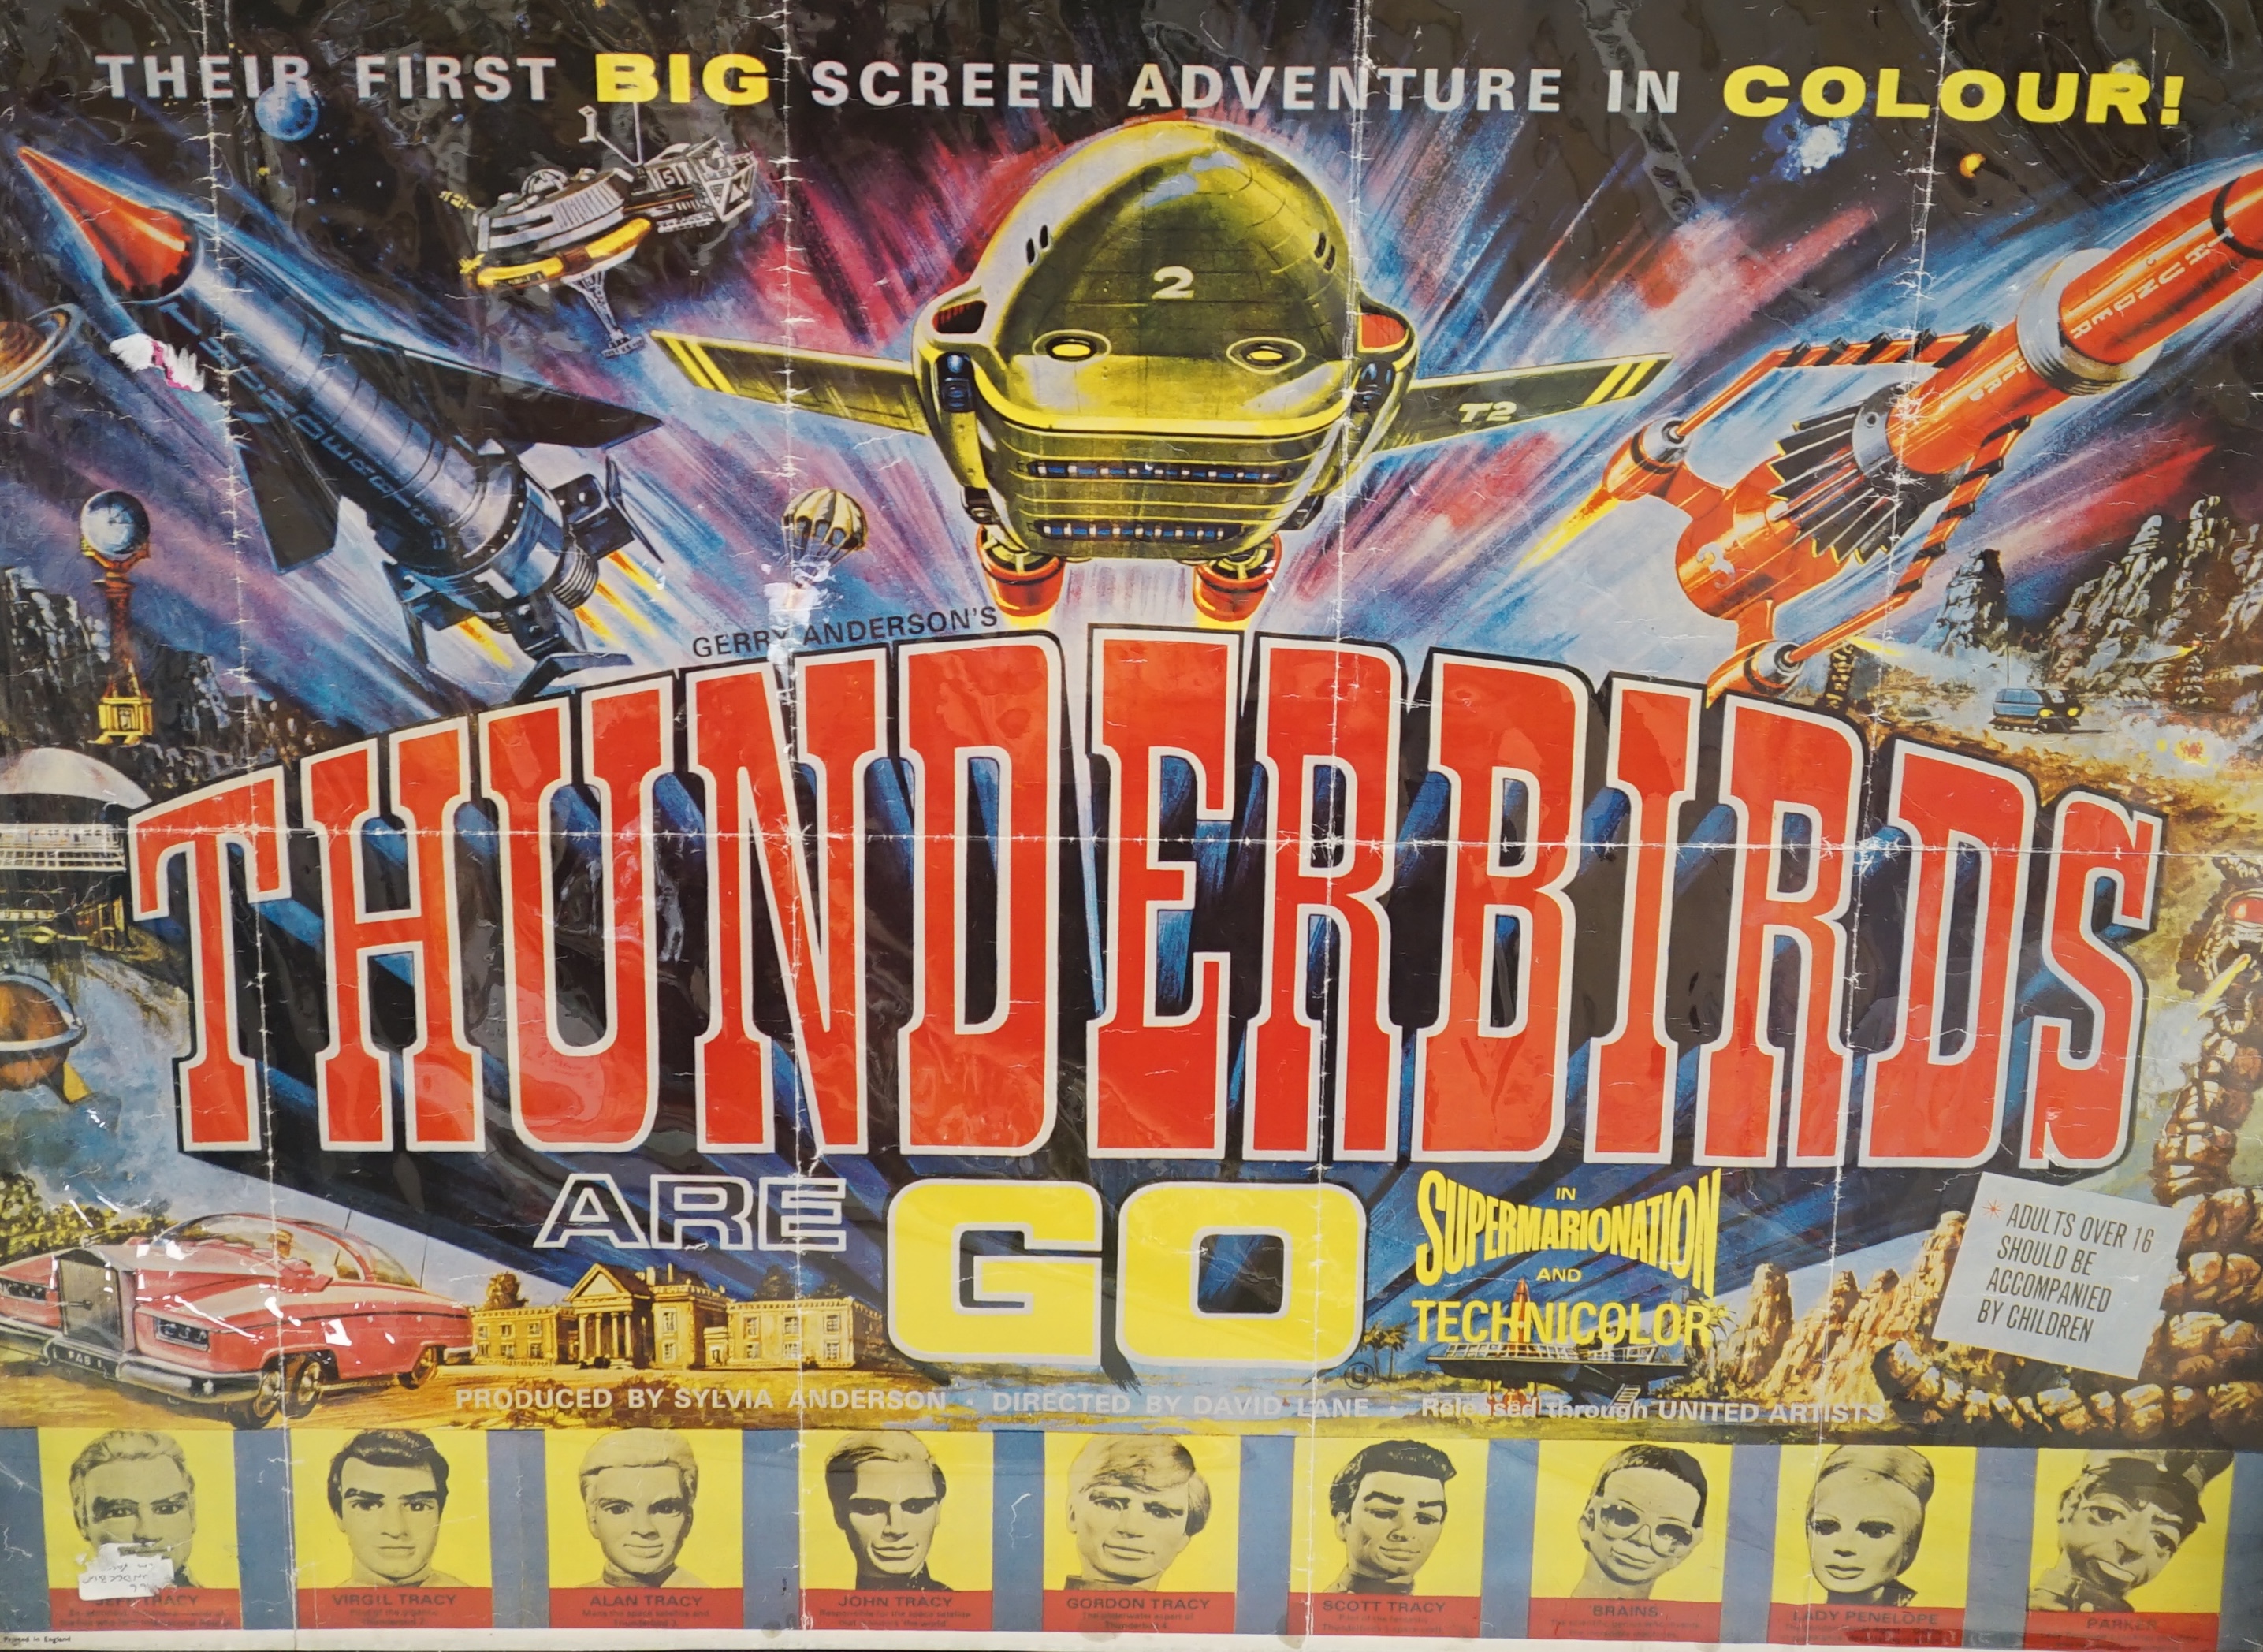 'Thunderbirds Are Go' film poster, a 1980’s reprint, 94cm x 78cm. Condition - fold marks, some small stains along the edges